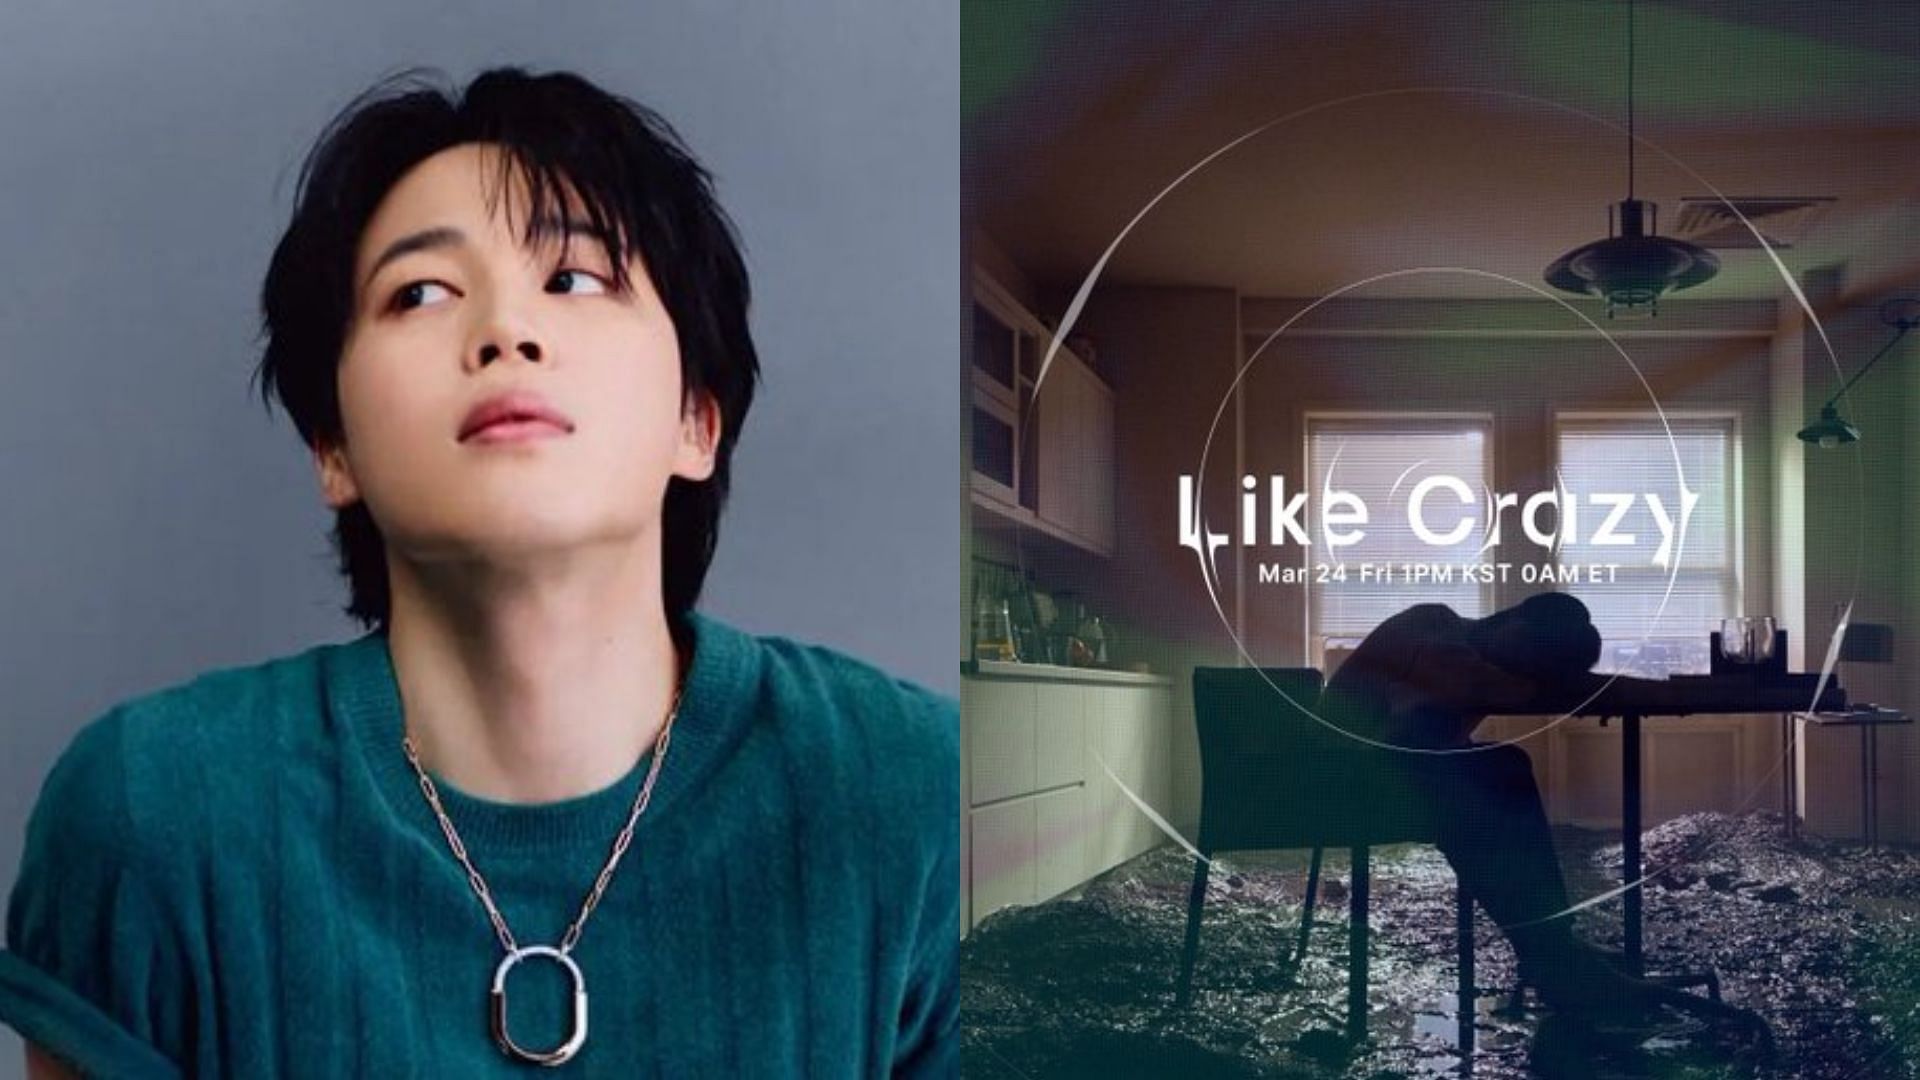 BTS Jimin brings music video of 'Like Crazy' from his first solo